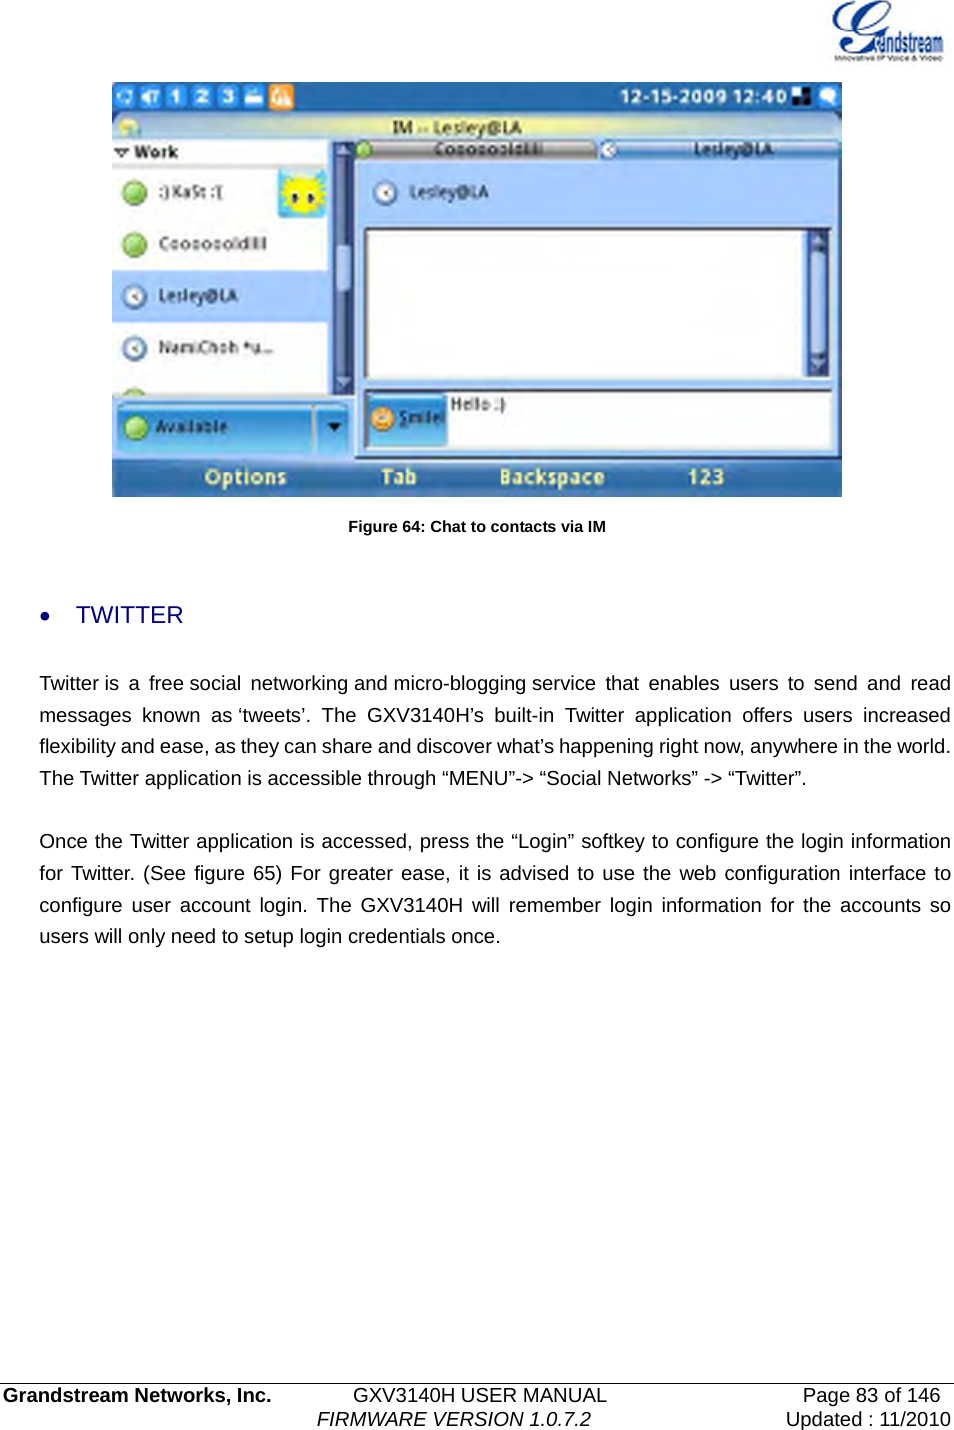   Grandstream Networks, Inc.        GXV3140H USER MANUAL                  Page 83 of 146                                FIRMWARE VERSION 1.0.7.2 Updated : 11/2010   Figure 64: Chat to contacts via IM  • TWITTER Twitter is a free social networking and micro-blogging service that enables users to send and read messages known as ‘tweets’. The GXV3140H’s built-in Twitter application offers users increased flexibility and ease, as they can share and discover what’s happening right now, anywhere in the world. The Twitter application is accessible through “MENU”-&gt; “Social Networks” -&gt; “Twitter”.    Once the Twitter application is accessed, press the “Login” softkey to configure the login information for Twitter. (See figure 65) For greater ease, it is advised to use the web configuration interface to configure user account login. The GXV3140H will remember login information for the accounts so users will only need to setup login credentials once. 